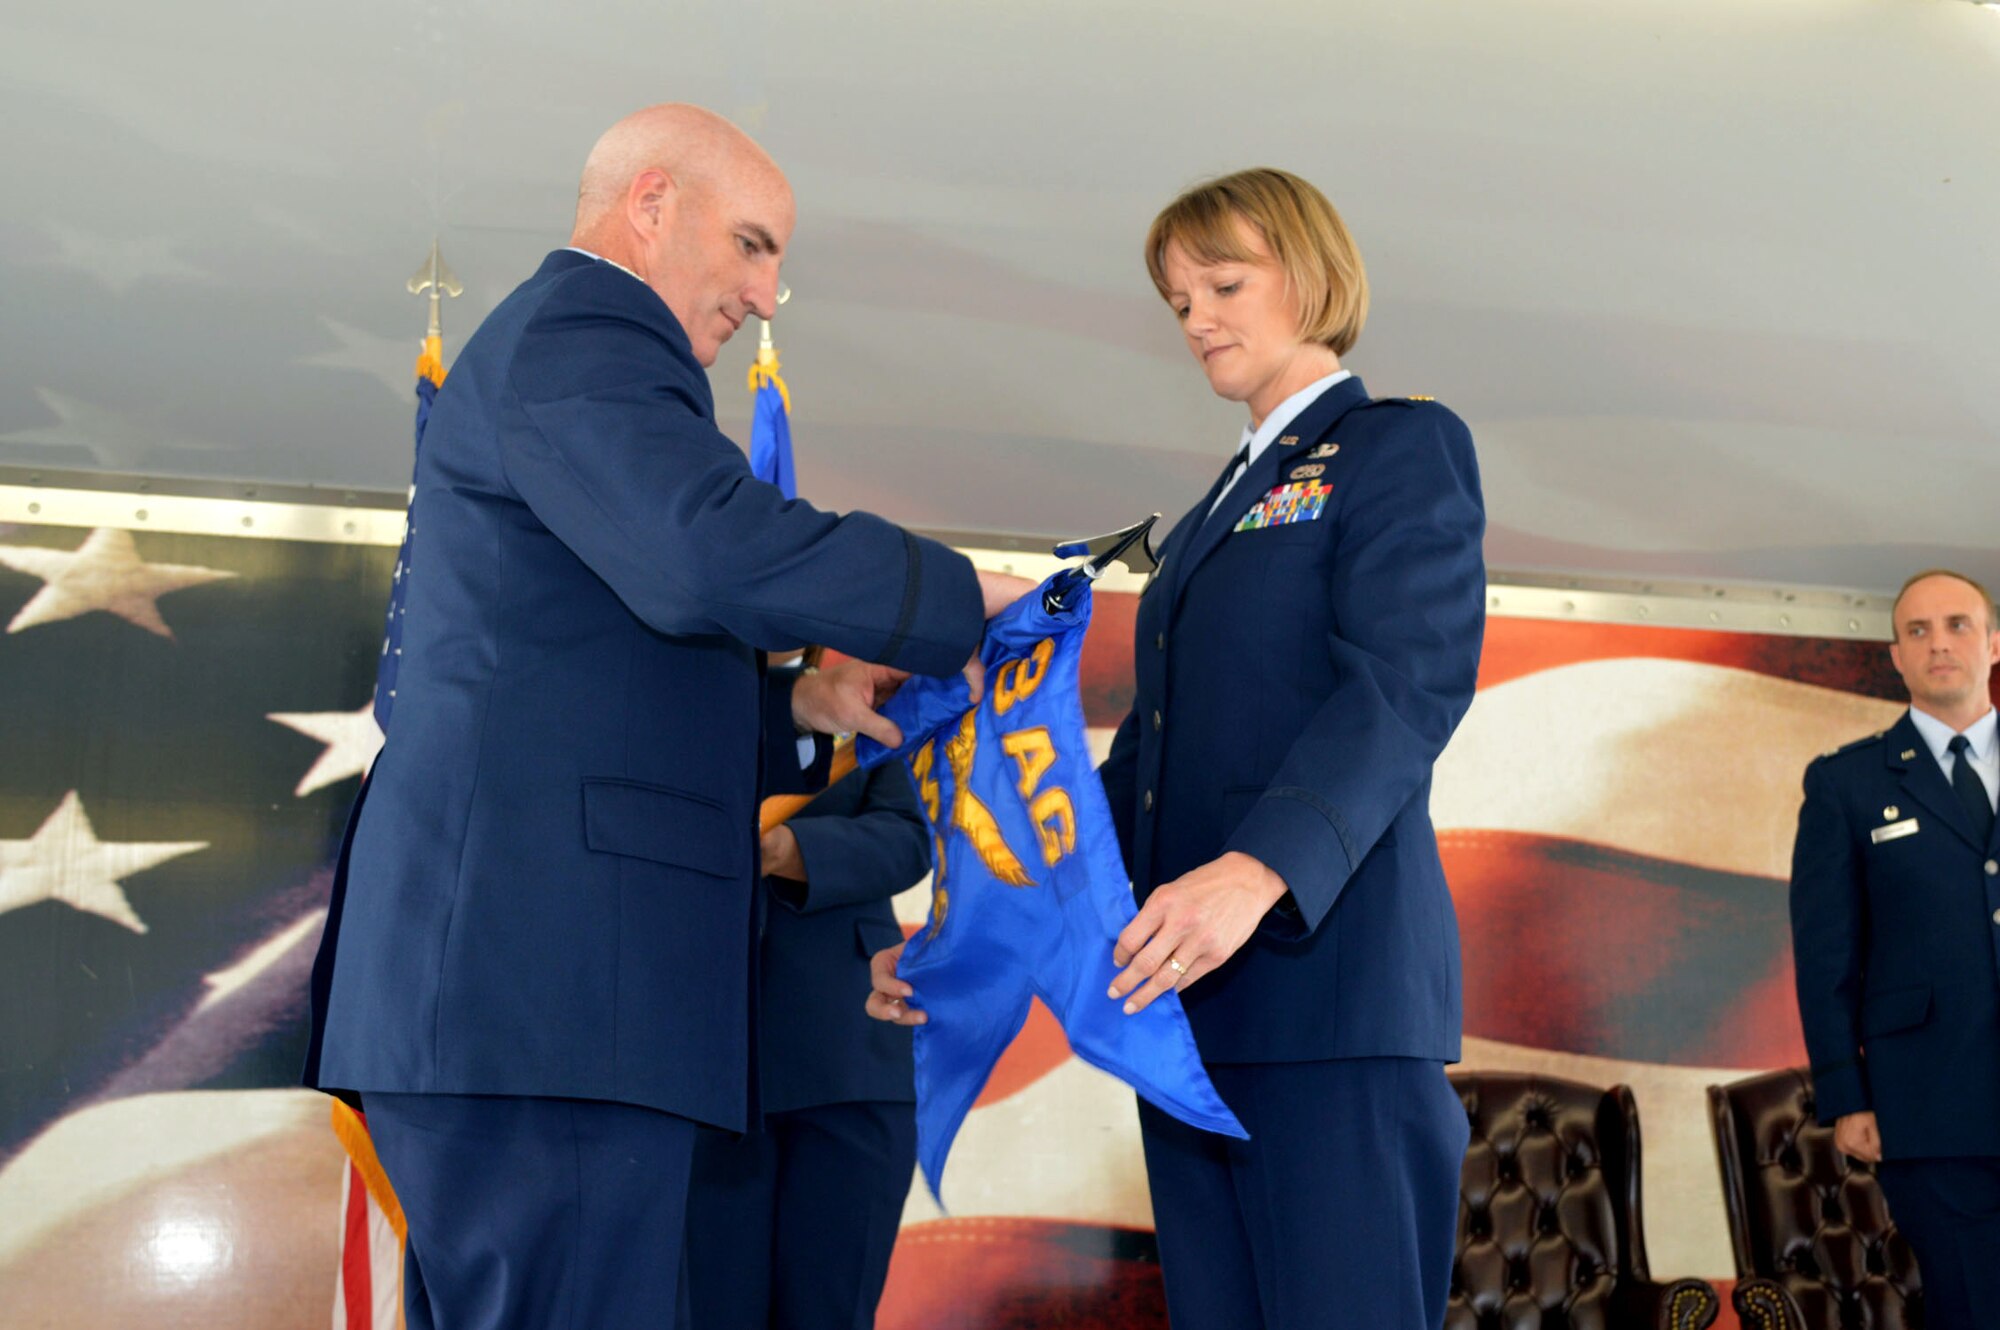 Maj. Michelle Taylor, 2nd Airlift Squadron commander, right, and Col. Kenneth Moss, 43rd Airlift Group commander, case the 43rd Aircraft Maintenance Squadron guidon during the 43rd Air Mobility Squadron activation ceremony July 1, 2015, at Pope Army Airfield, North Carolina. Aircraft maintenance and aerial port Airmen and functions transferred to the newly established 43rd AMS from the inactivated 3rd Aerial Port Squadron and the 43rd AMXS. (U.S. Air Force photo/Marvin Krause)